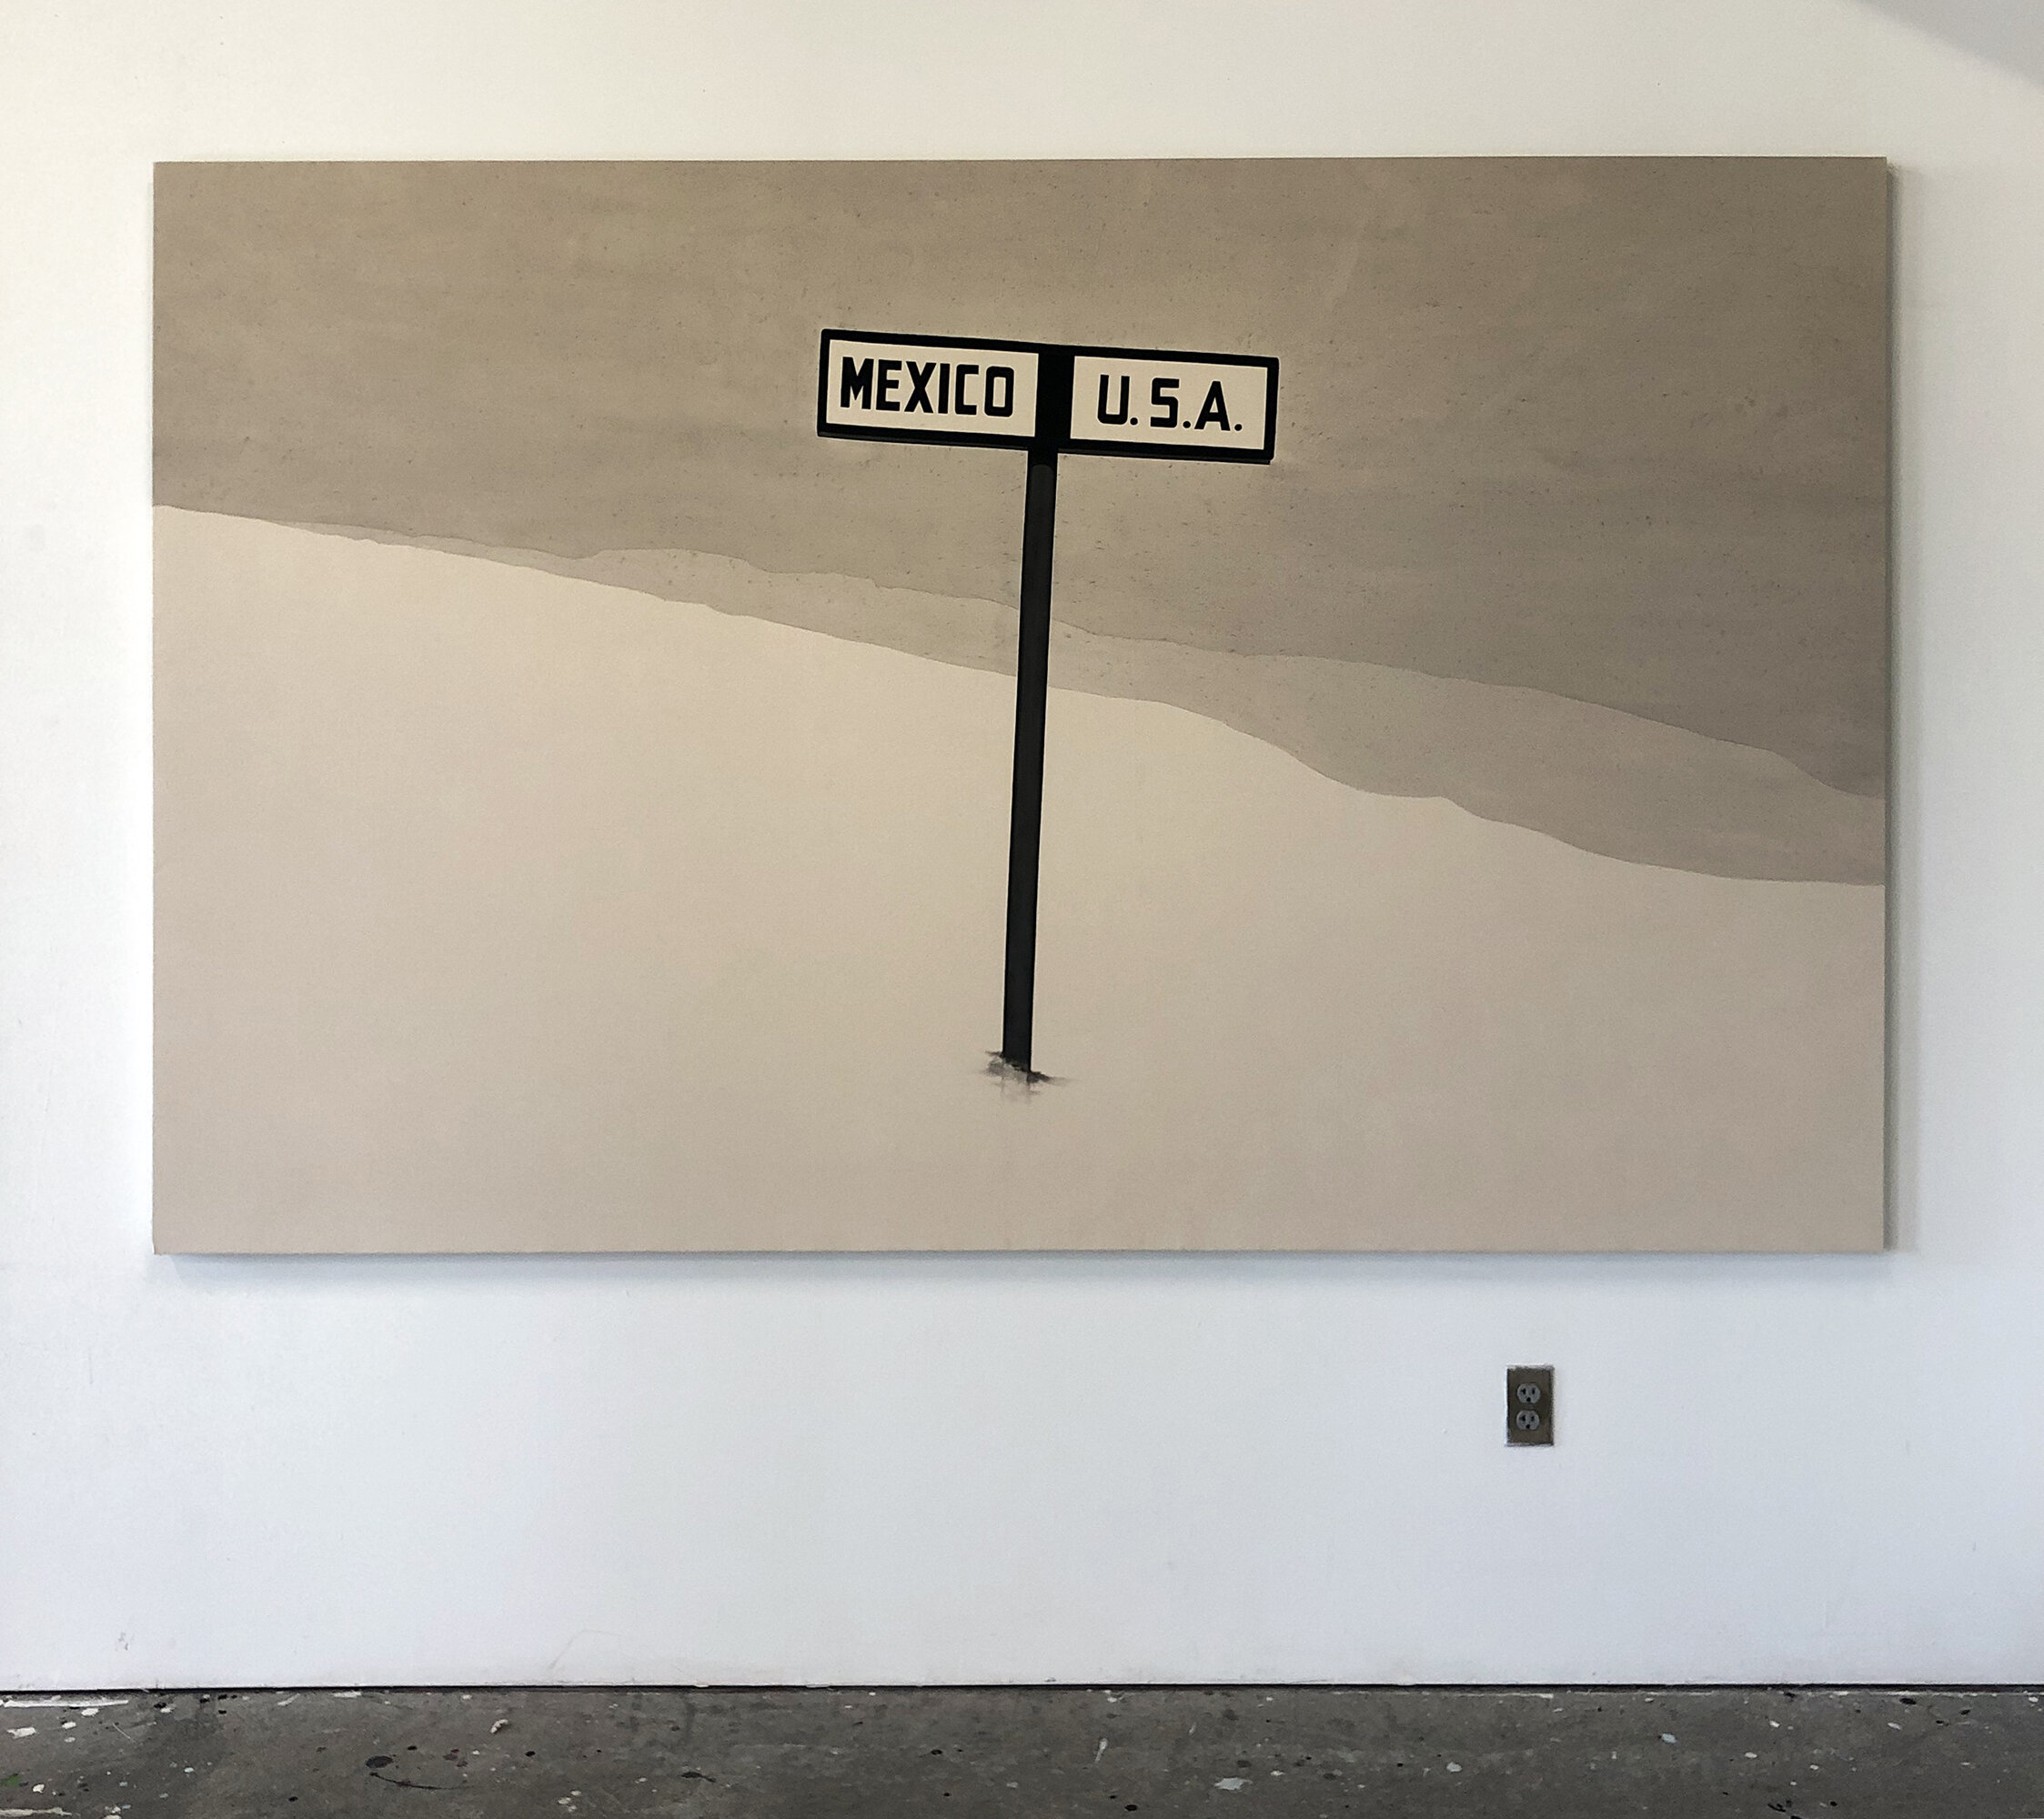   The Border , 2020 Black gesso on canvas 60 x 96 inches (1.52m x 2.43m) 